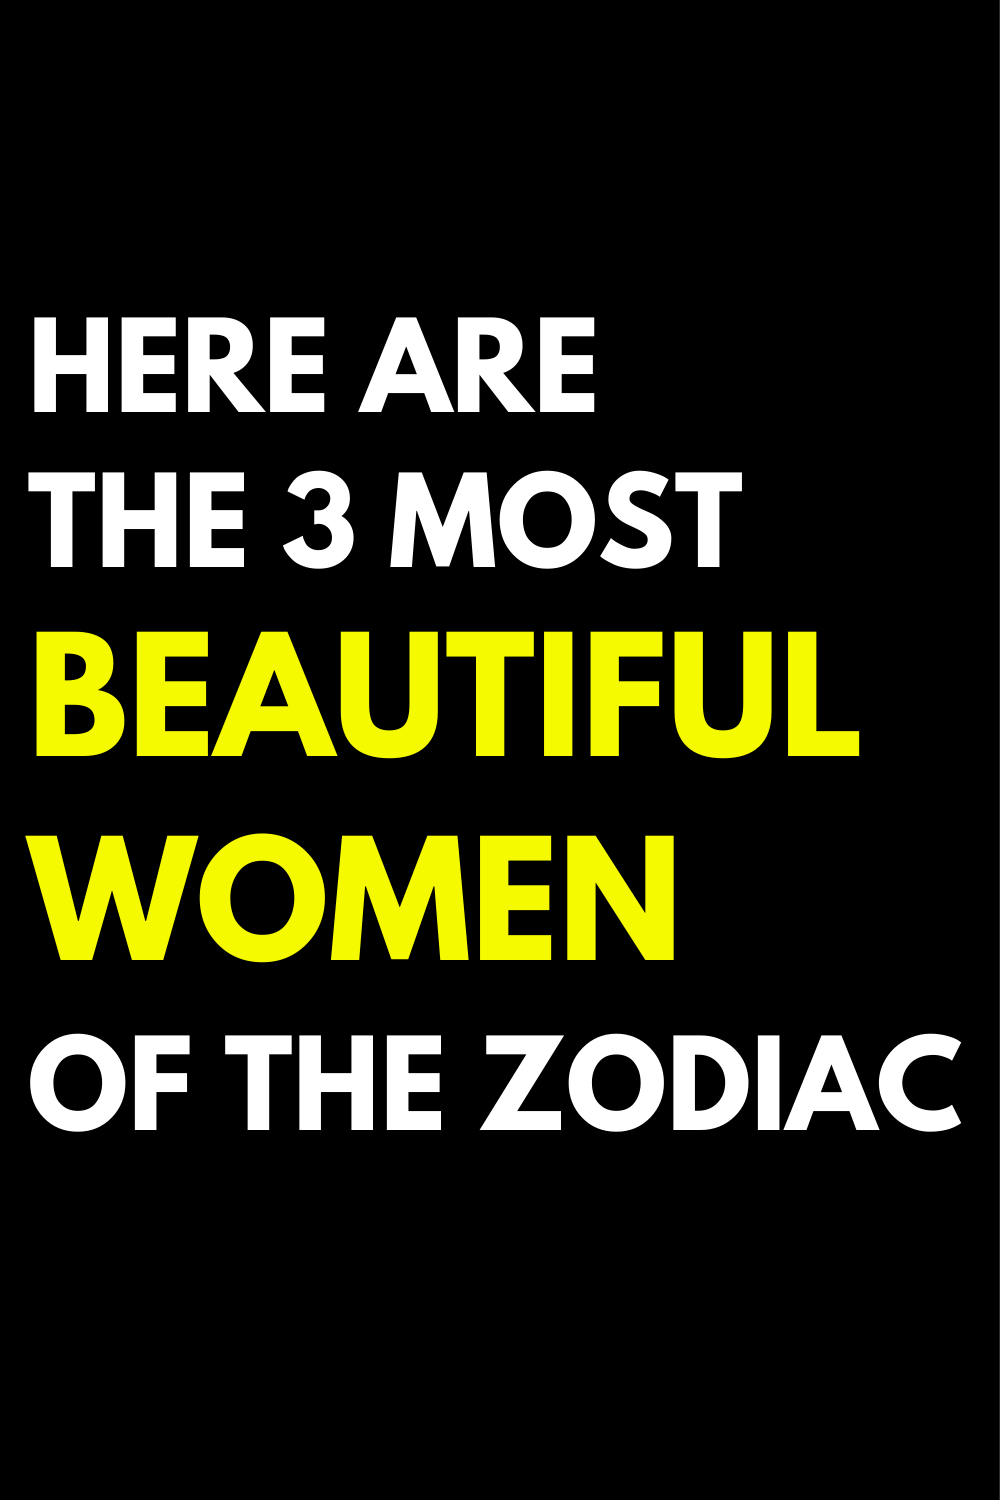 Here Are The 3 Most Beautiful Women Of The Zodiac